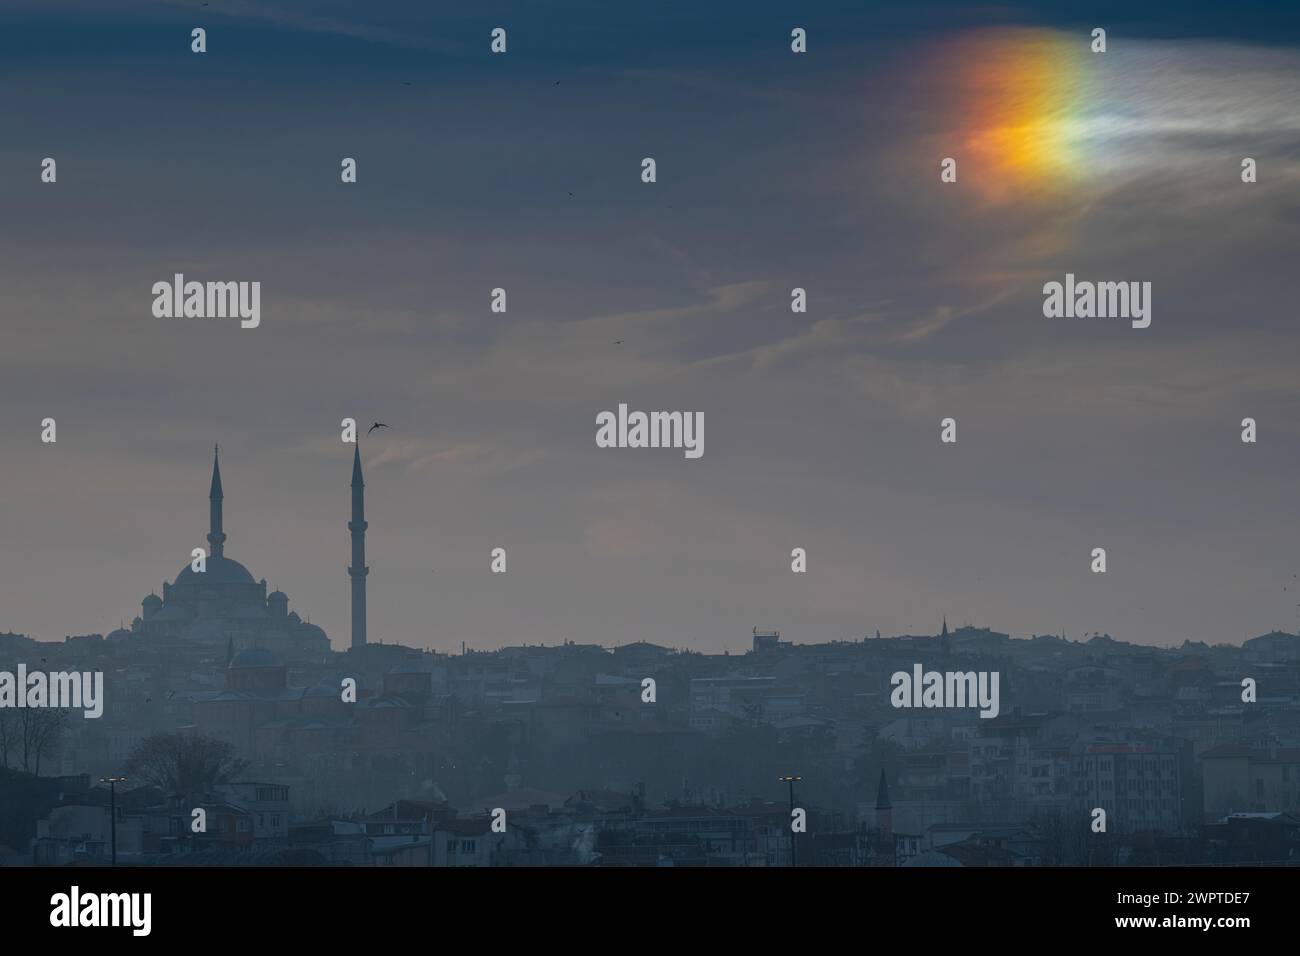 Fatih mosque in the distance in Istanbul Stock Photo